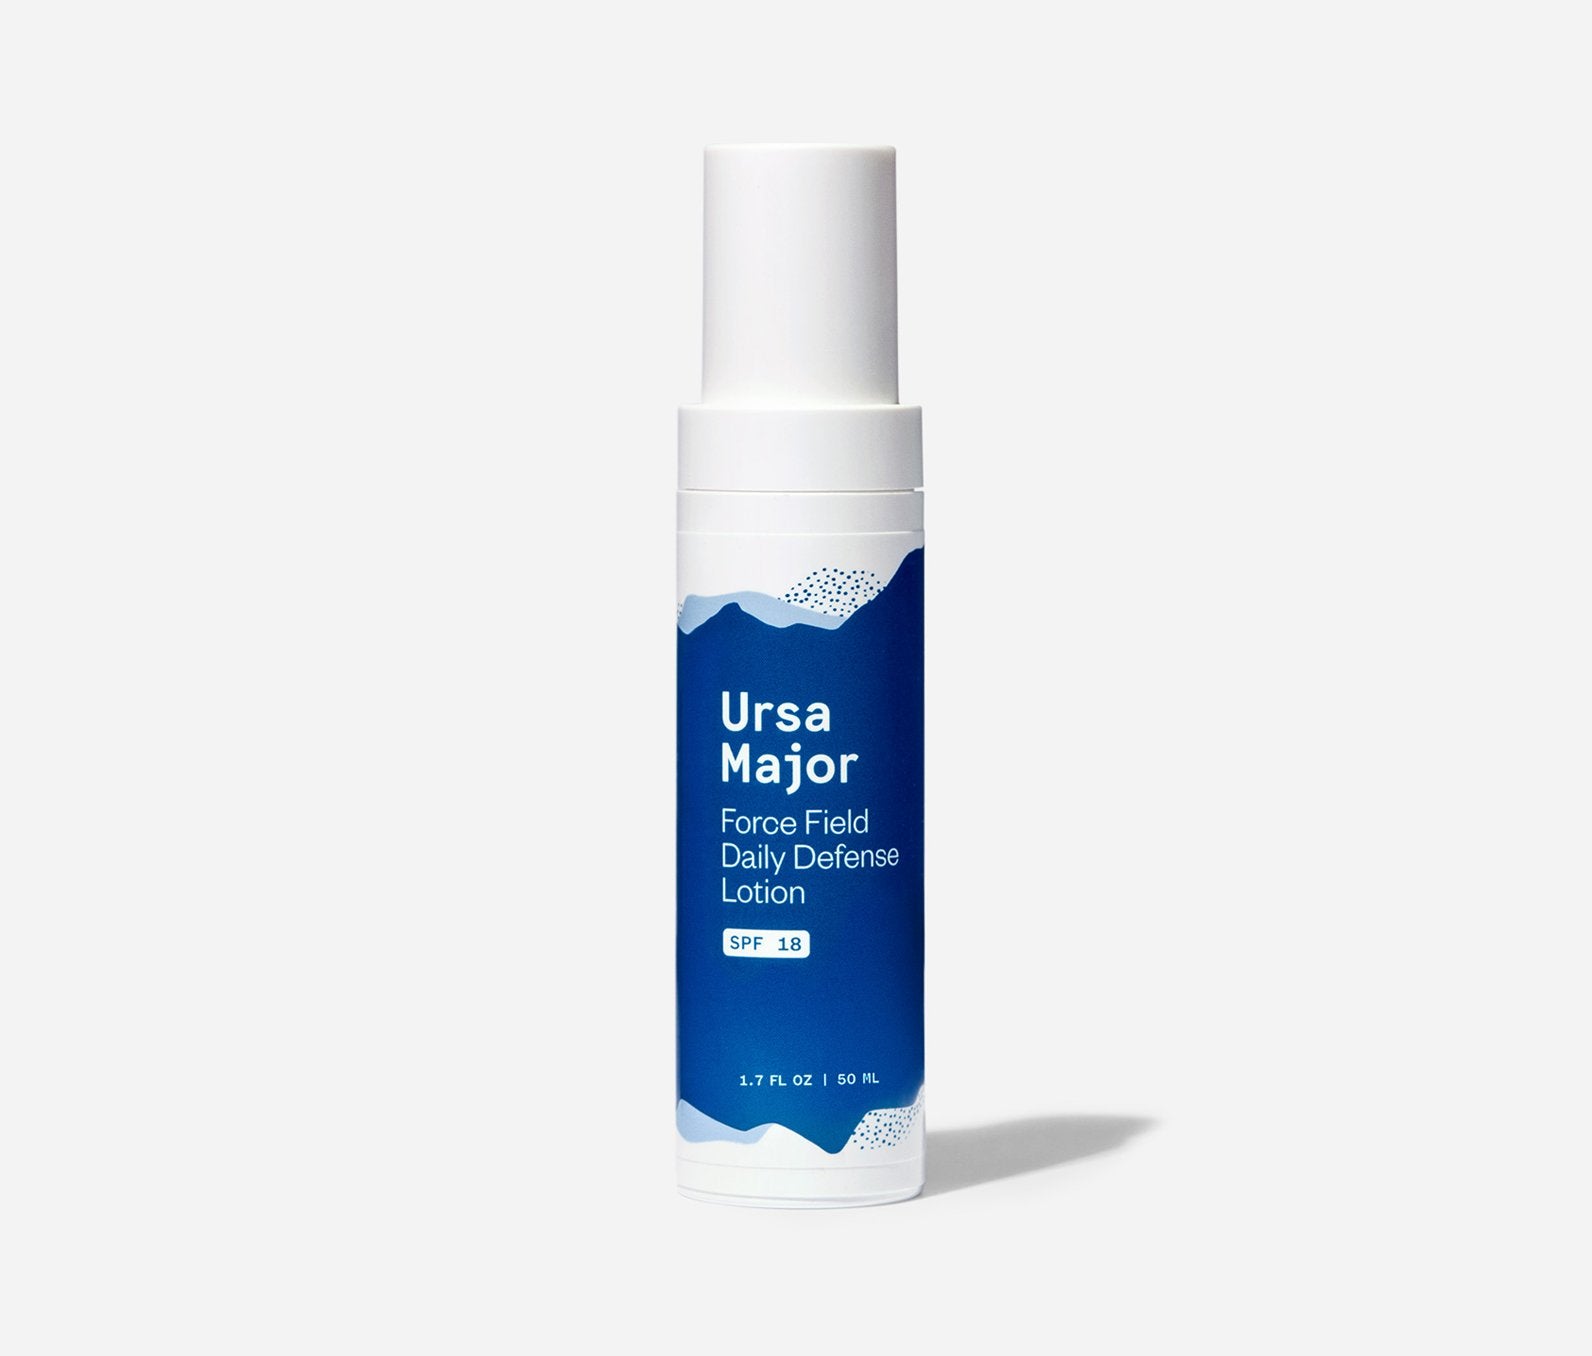 Ursa Major Force Field Daily Defense Lotion. Cruelty-free, created using clean ingredients and UVA/UVB protection. Made in the USA.